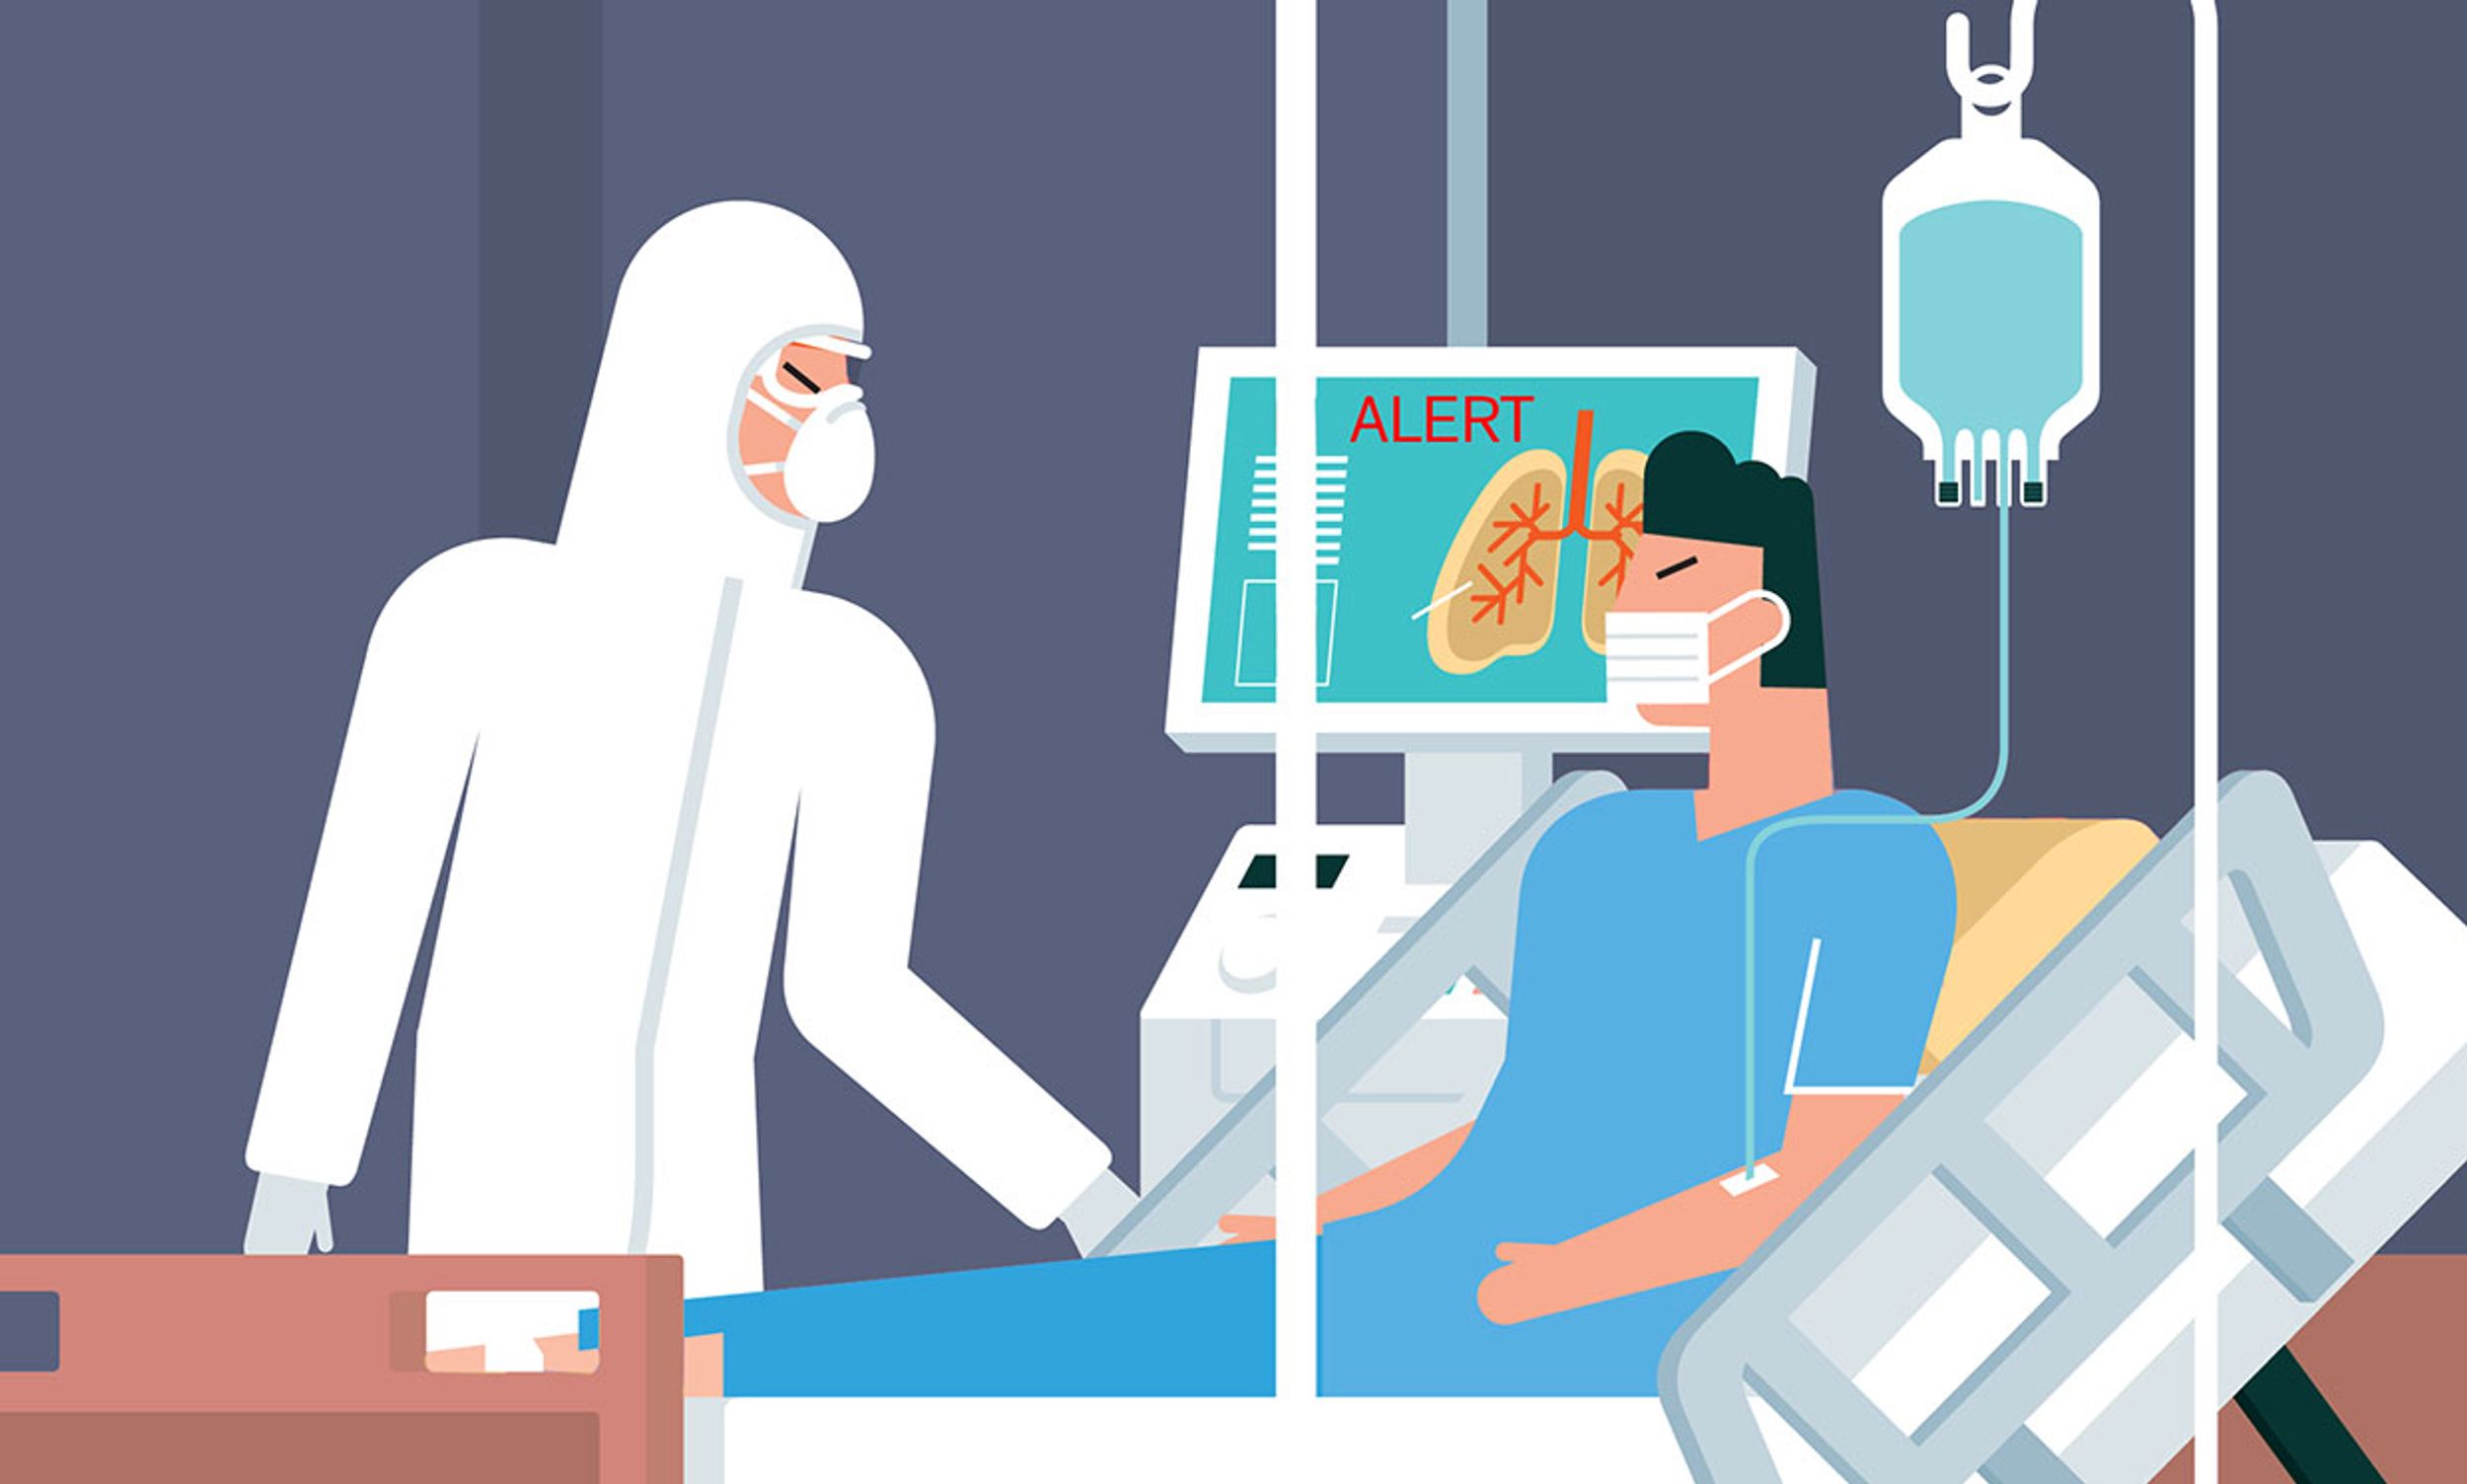 Illustration of AI helping a doctor predict an alert for a COVID19 patient.